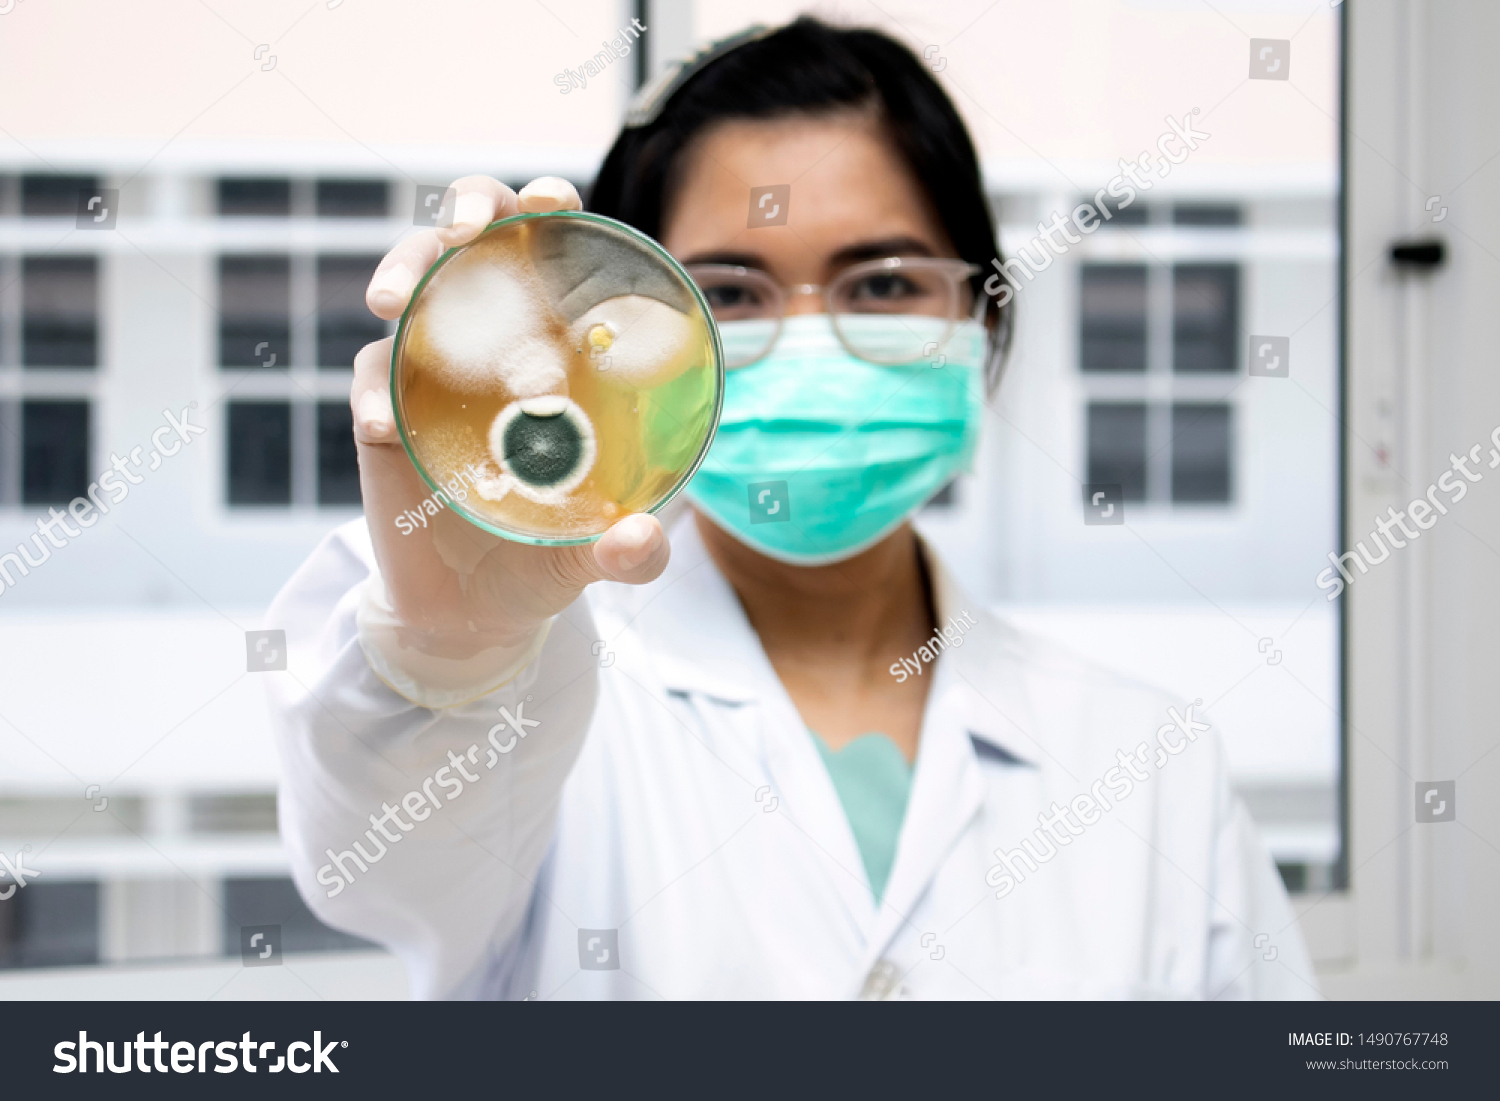 Woman scientist holding molds in petri dish with mea malt extract agar. Medical tests in laboratory experiment for checking fungus from the room. #1490767748